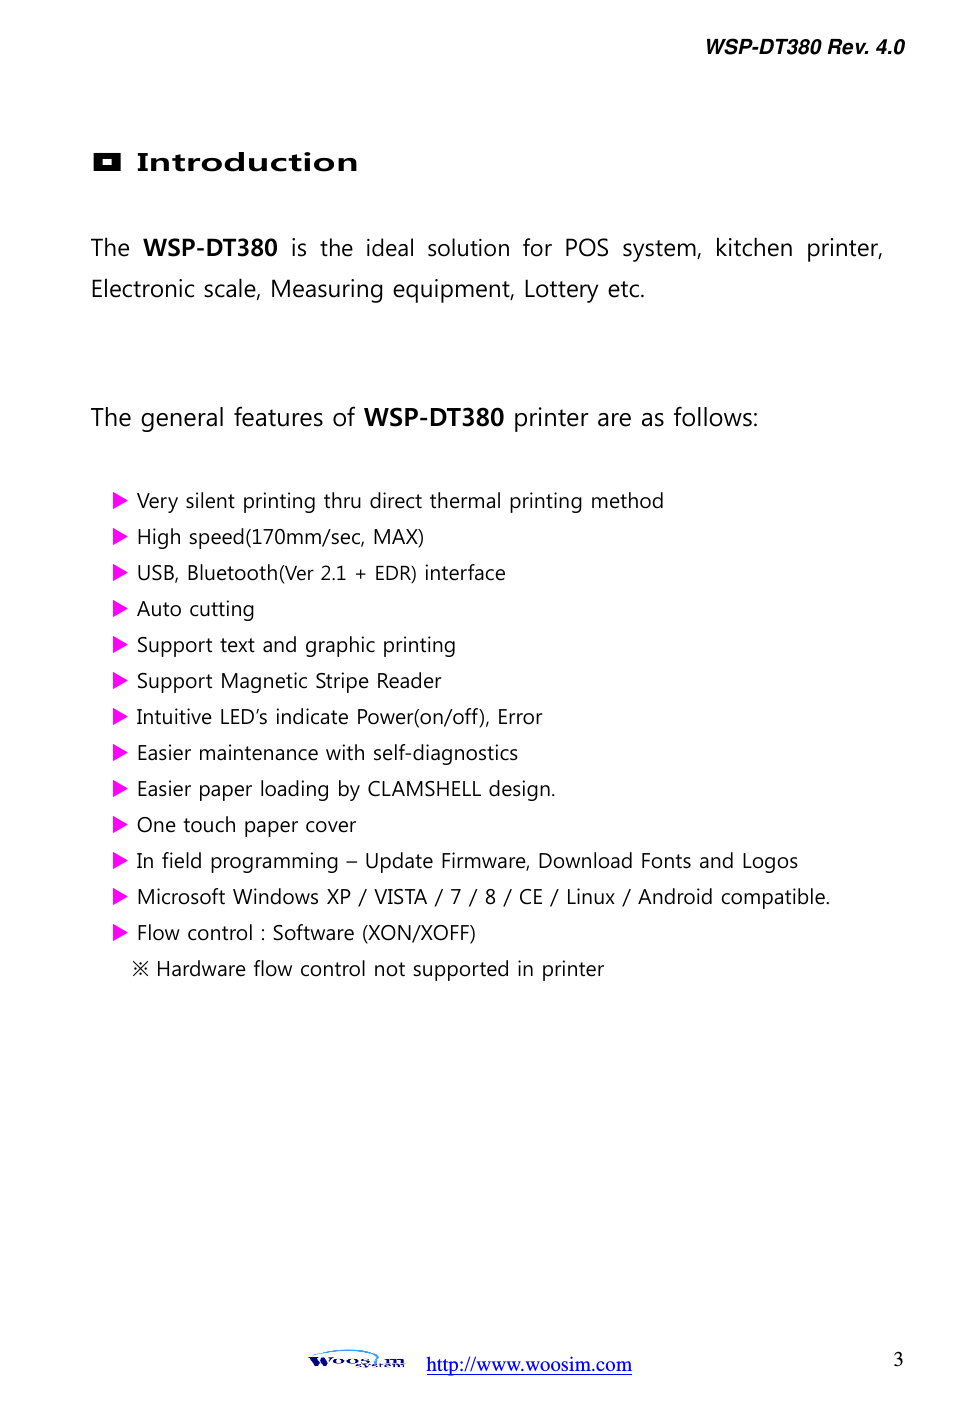 WSP-DT380 Rev. 4.0   http://www.woosim.com 3                                 Introduction  The  WSP-DT380  is  the  ideal  solution  for  POS  system,  kitchen  printer, Electronic scale, Measuring equipment, Lottery etc.   The general features of WSP-DT380 printer are as follows:   Very silent printing thru direct thermal printing method  High speed(170mm/sec, MAX)  USB, Bluetooth(Ver 2.1 + EDR) interface  Auto cutting  Support text and graphic printing  Support Magnetic Stripe Reader    Intuitive LED’s indicate Power(on/off), Error  Easier maintenance with self-diagnostics  Easier paper loading by CLAMSHELL design.  One touch paper cover    In field programming – Update Firmware, Download Fonts and Logos  Microsoft Windows XP / VISTA / 7 / 8 / CE / Linux / Android compatible.  Flow control : Software (XON/XOFF) ※ Hardware flow control not supported in printer             